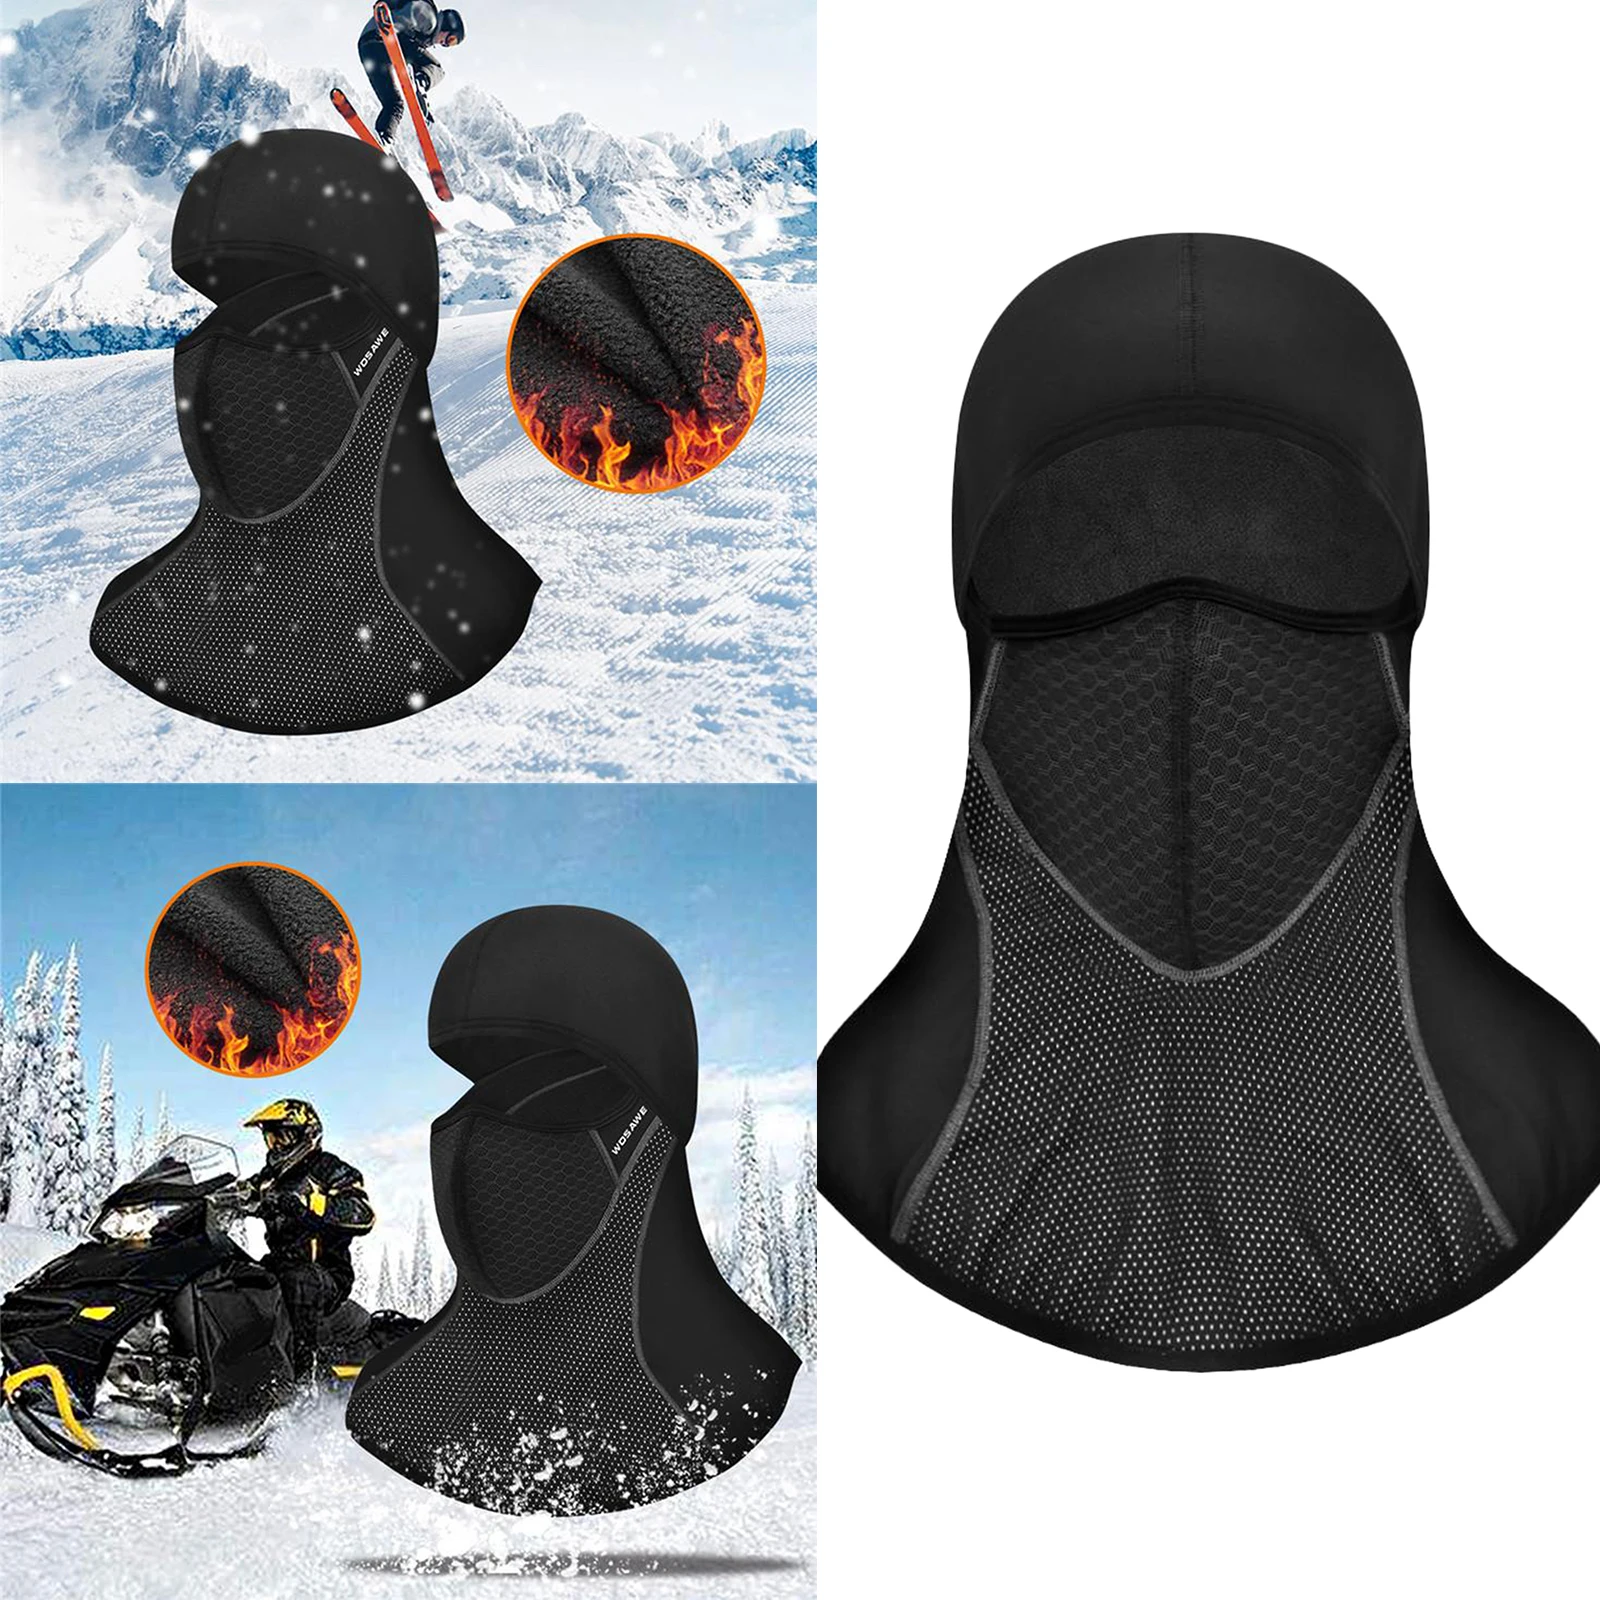 Waterproof Balaclava Ski Mask Winter Full Face Mask for Men Women Cold Weather Gear for Skiing, Snowboarding & Motorcycle Riding